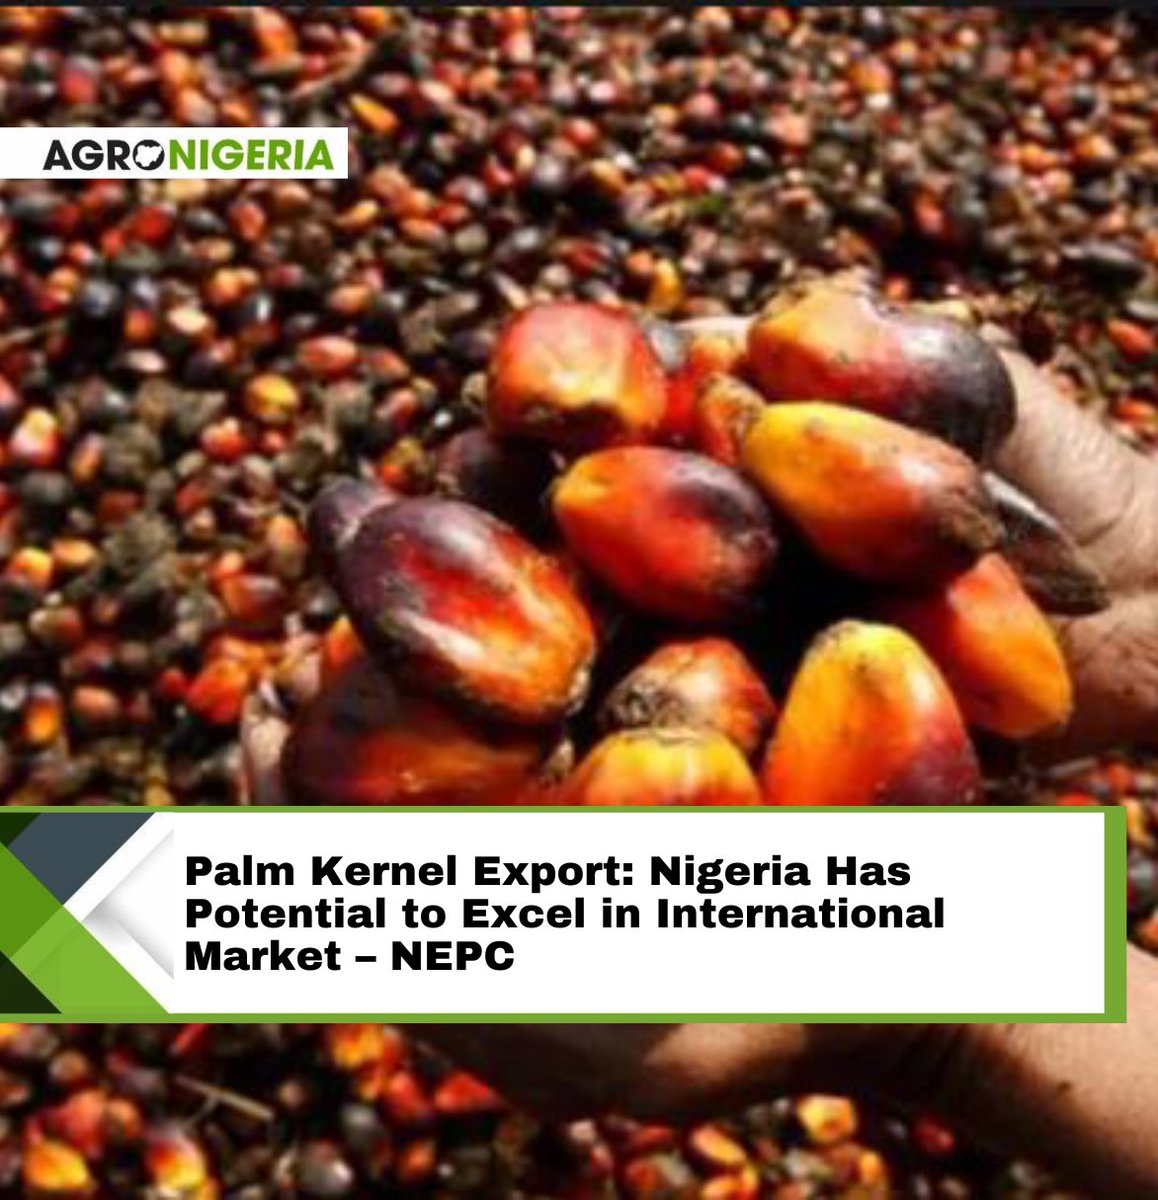 At a recent gathering in Port Harcourt, the CEO, Nigeria Export Promotion Council (NEPC), Nonye Ayeni, highlighted Nigeria’s potential to excel in the international market through palm kernel exports. Read more: agronigeria.ng/palm-kernel-ex…